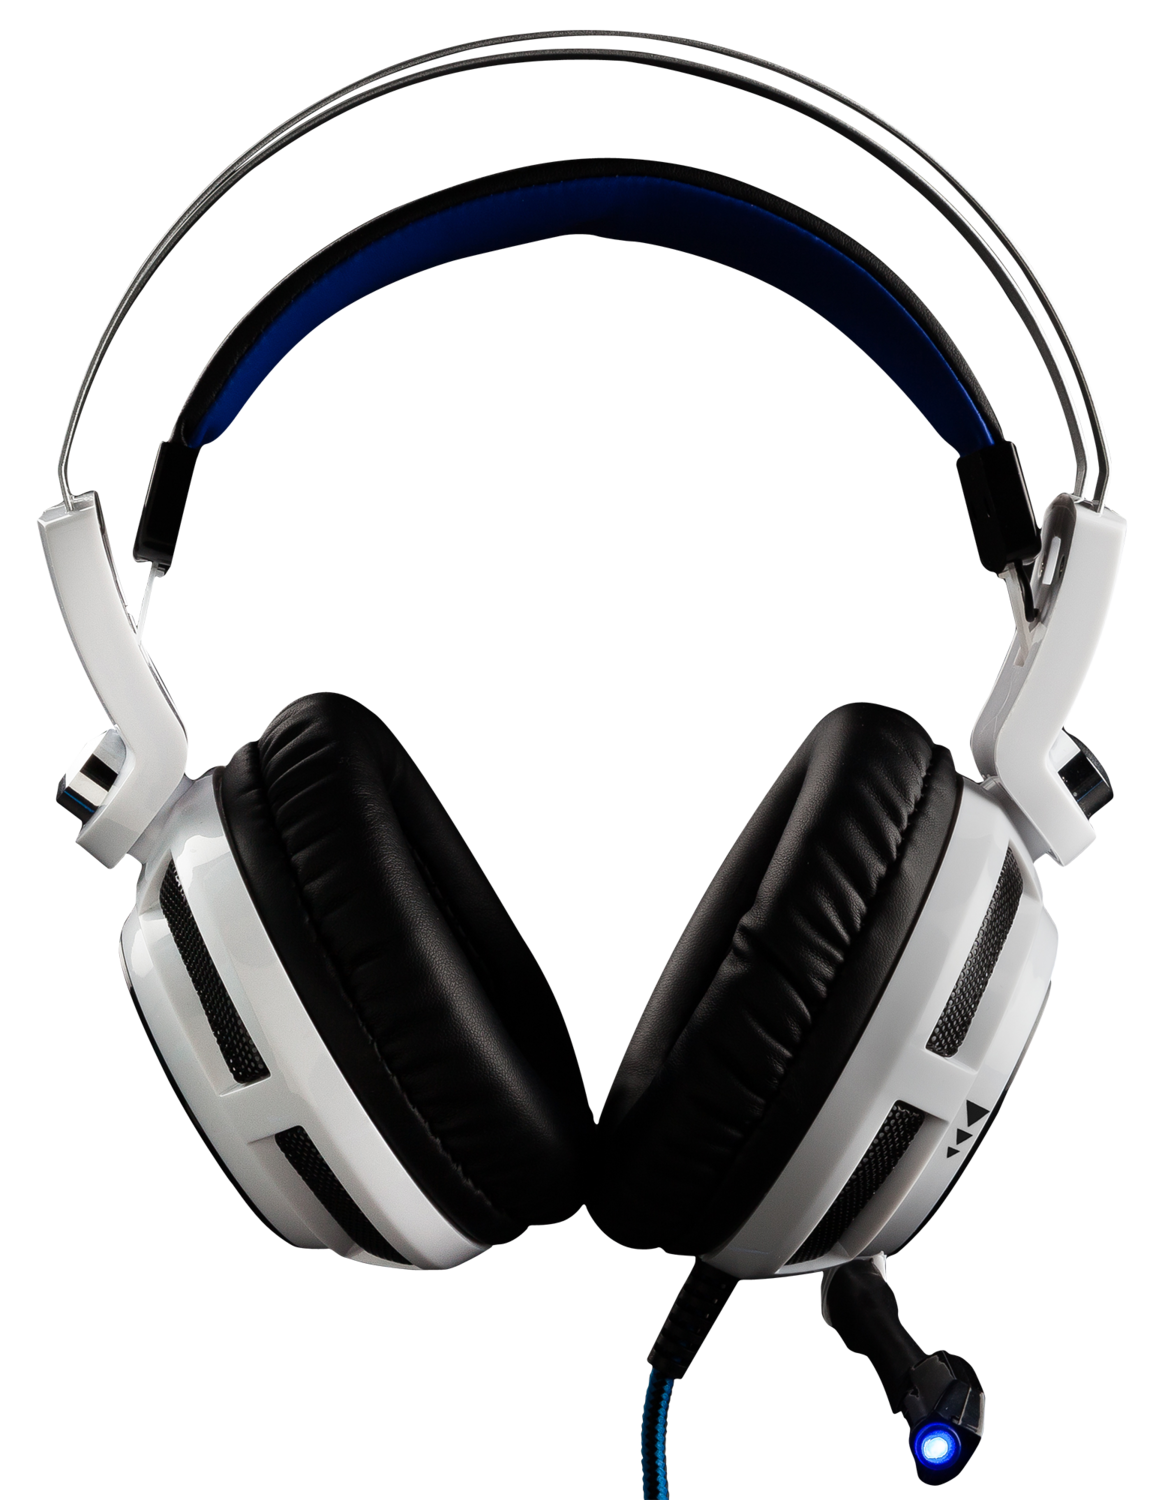 Casque Gaming LED avec micro et son Surround 7.1 GHS-400 Mod-IT, Casques  Gaming